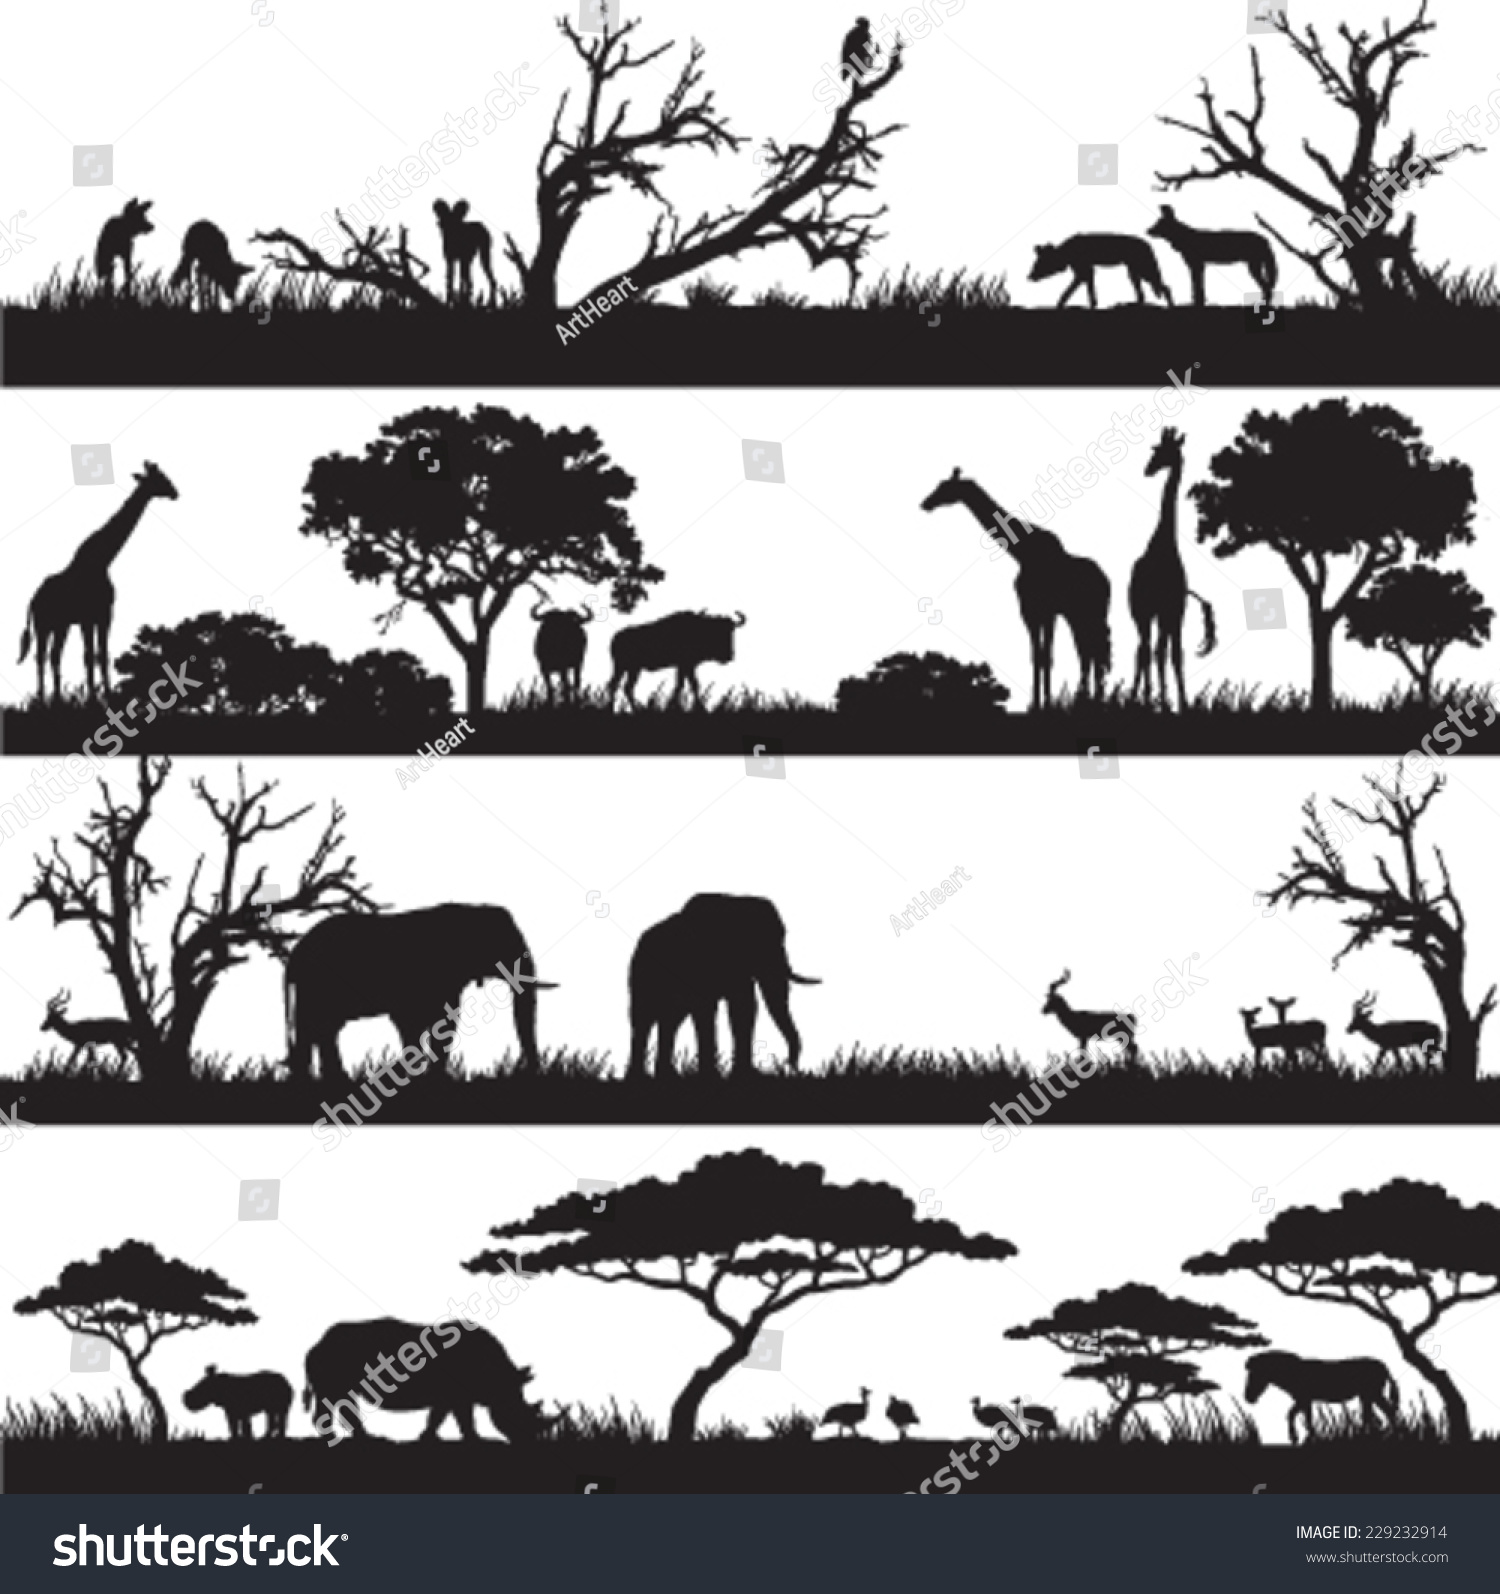 africa animal clipart - photo #43